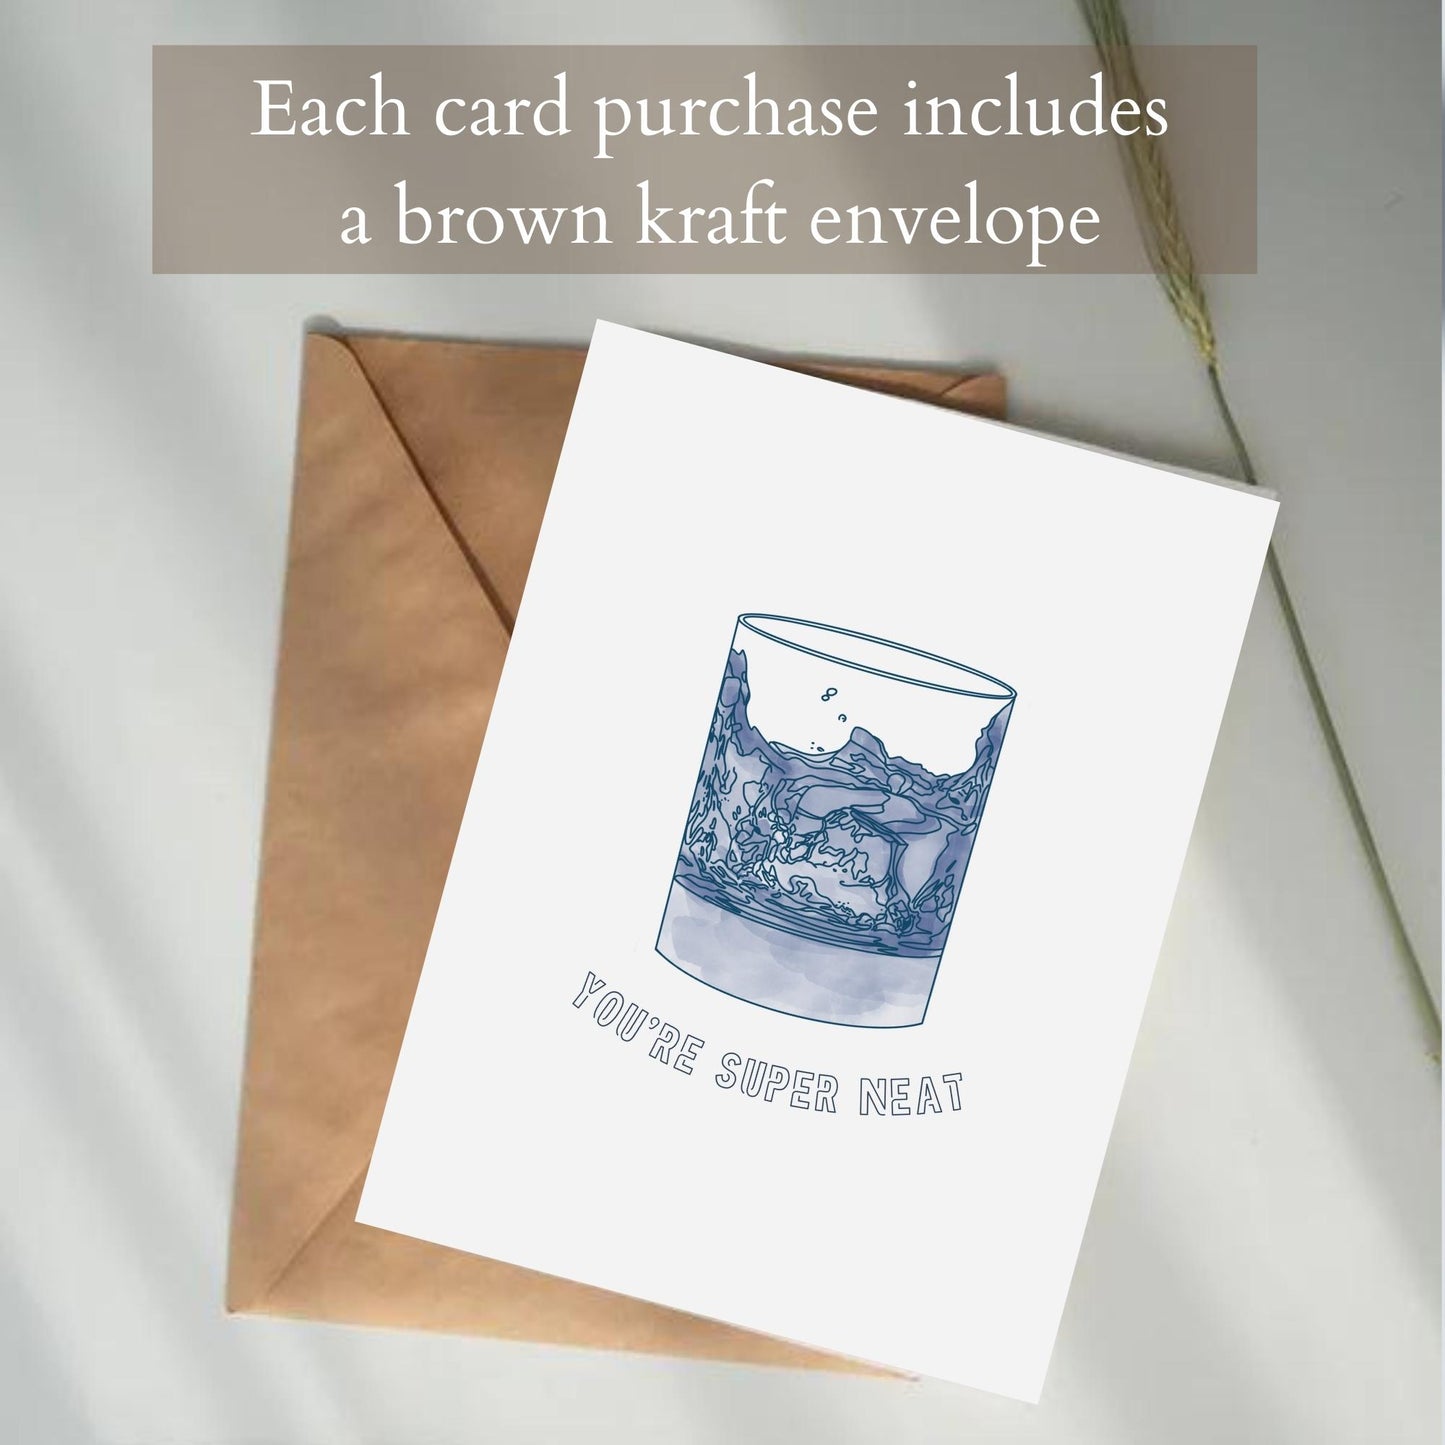 each card comes with a brown, kraft envelope